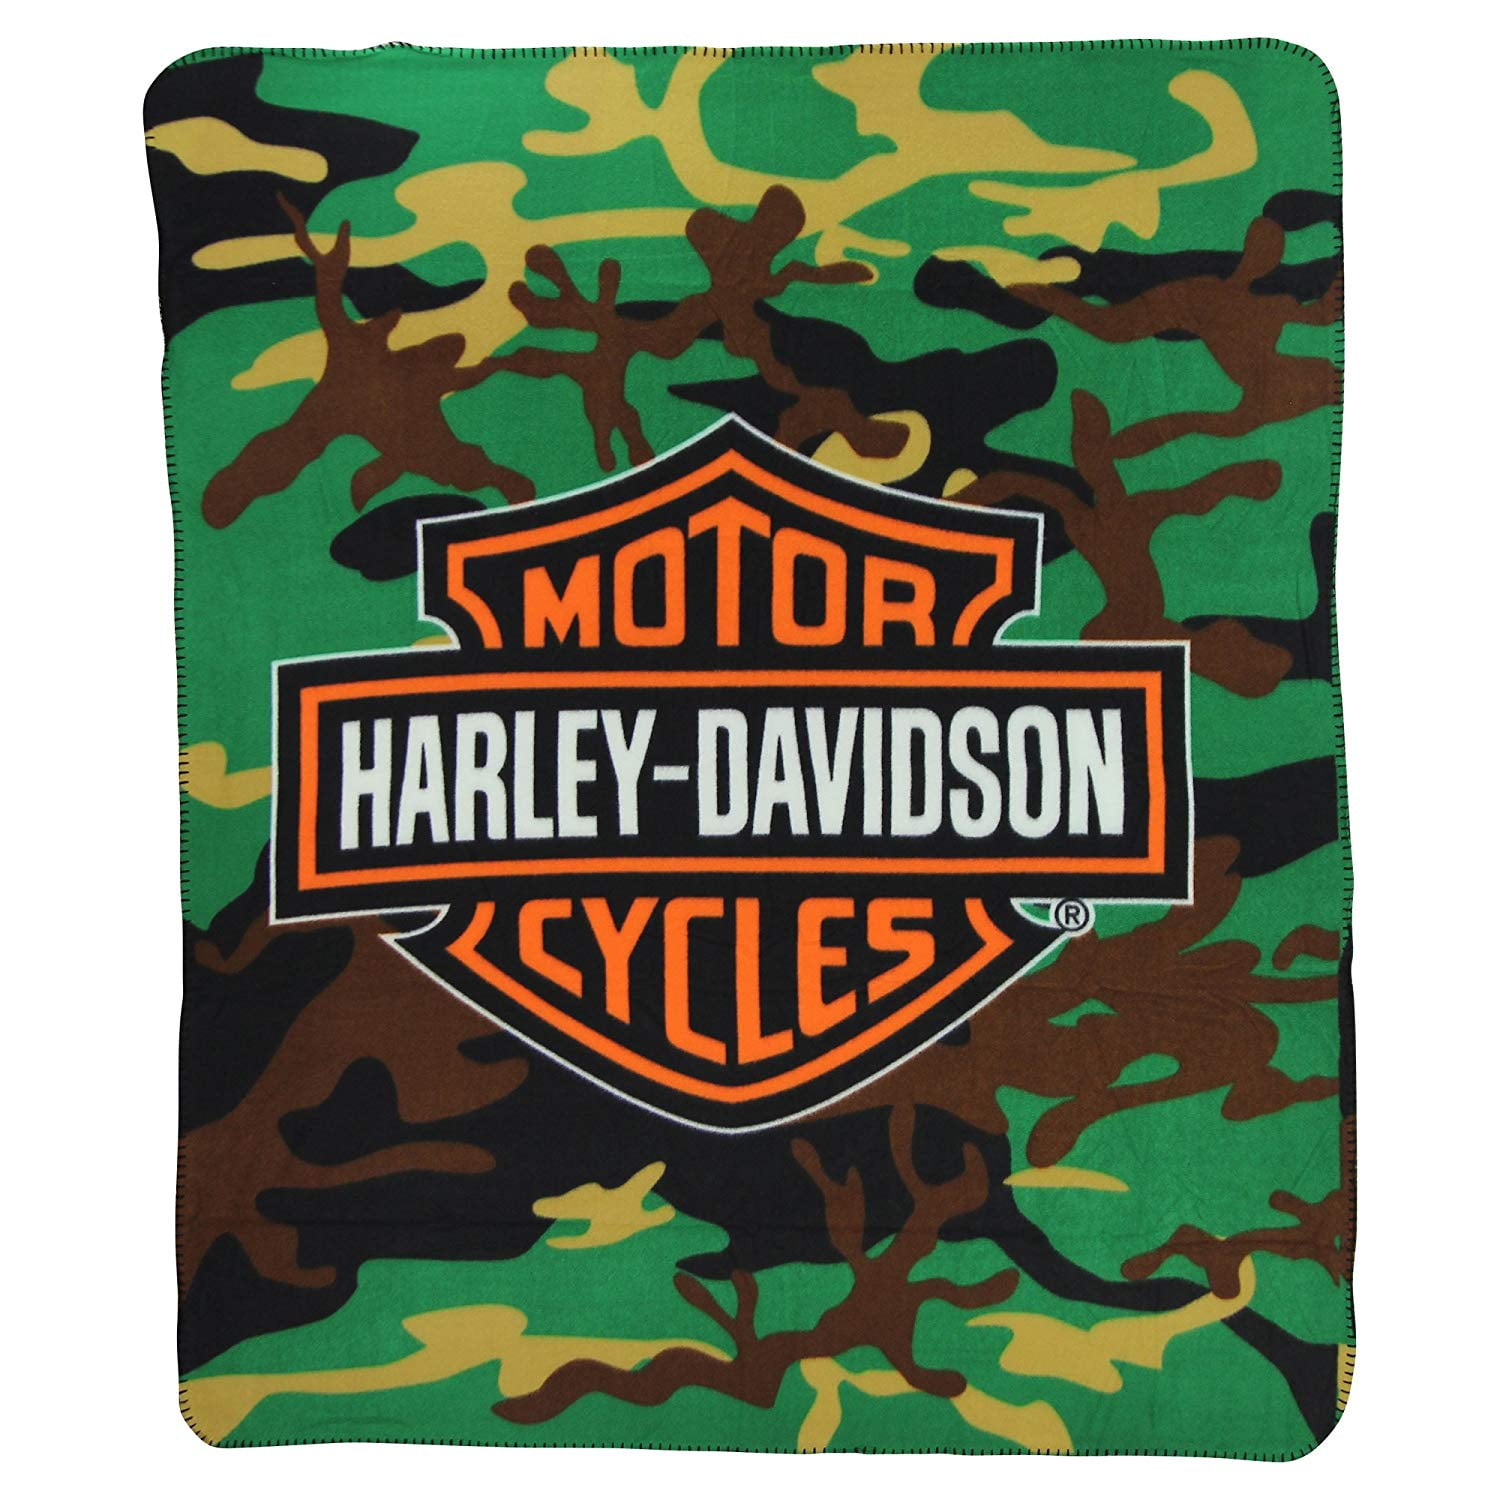 Flannel Plush Throw Blanket Harley David-Son Logo Lightweight for Bed Couch Living Room 